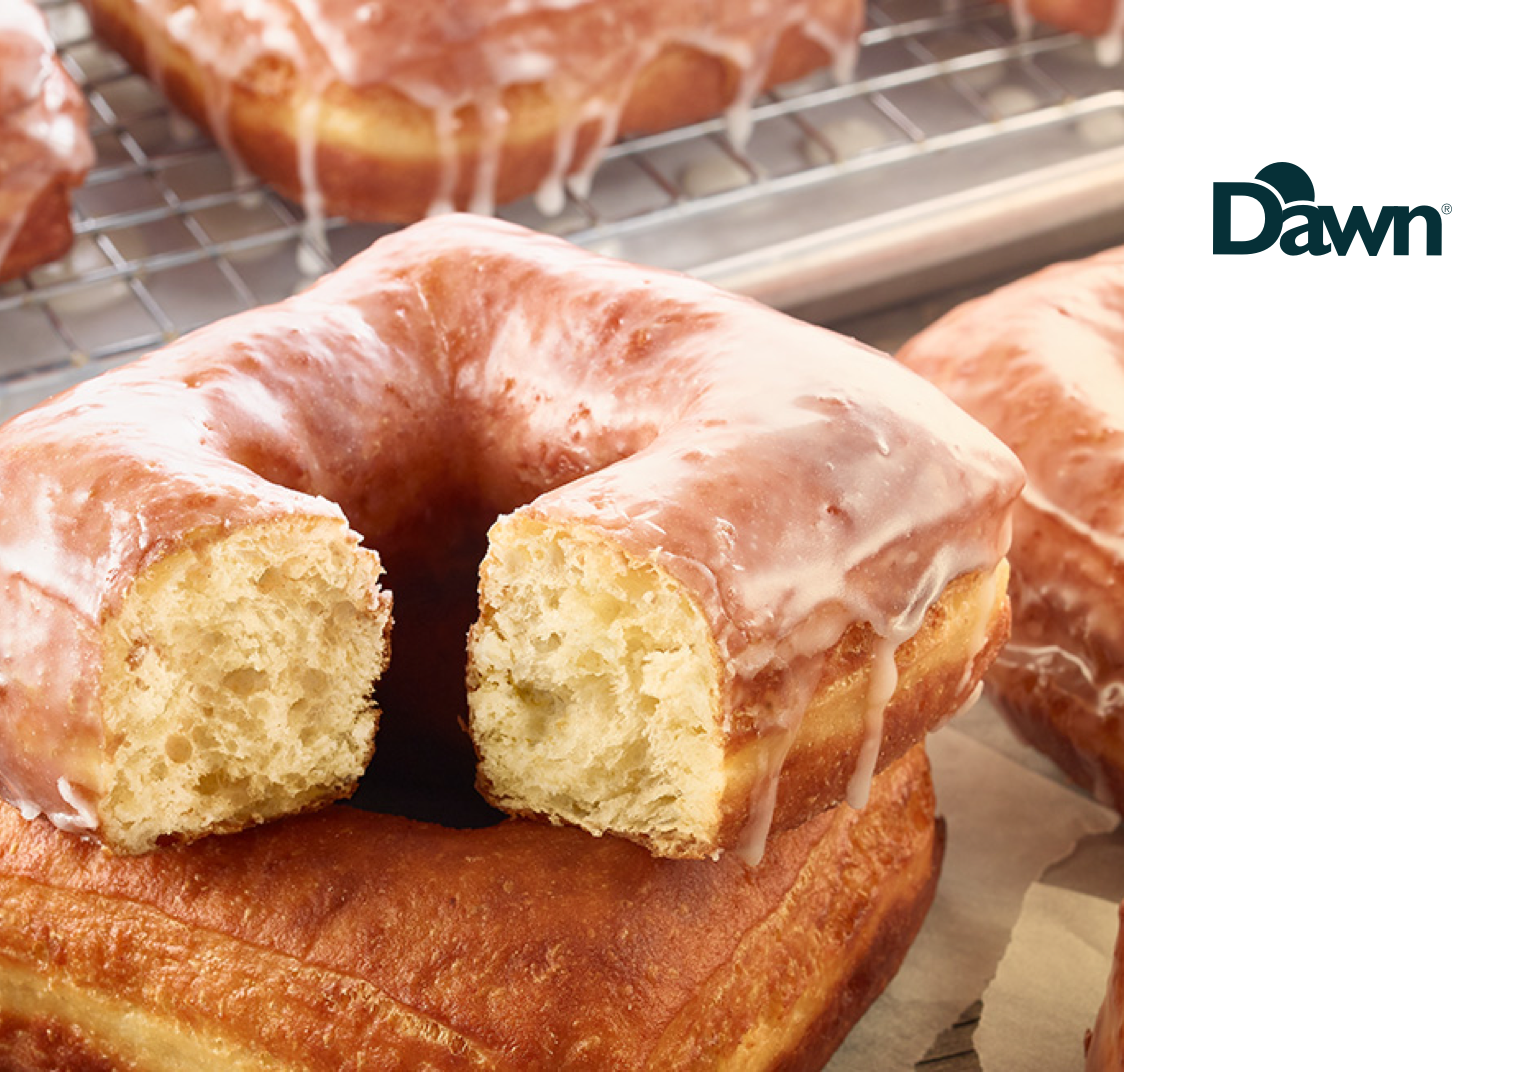 Dawn Foods is a global bakery manufacturer and supplier that inspires bakers around the world.